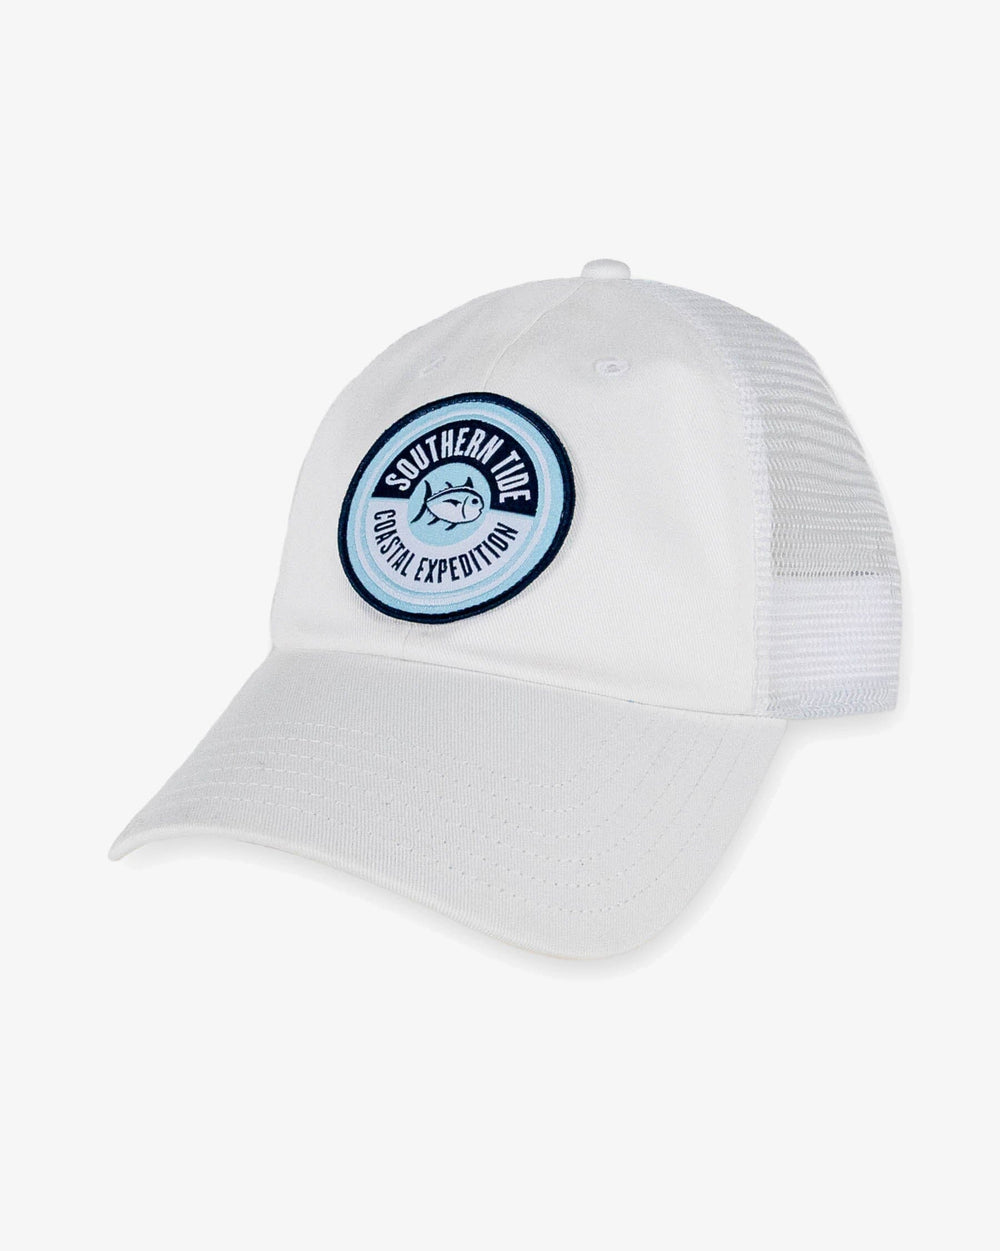 The front view of the Southern Tide Coastal Expedition Patch Trucker Hat by Southern Tide - White